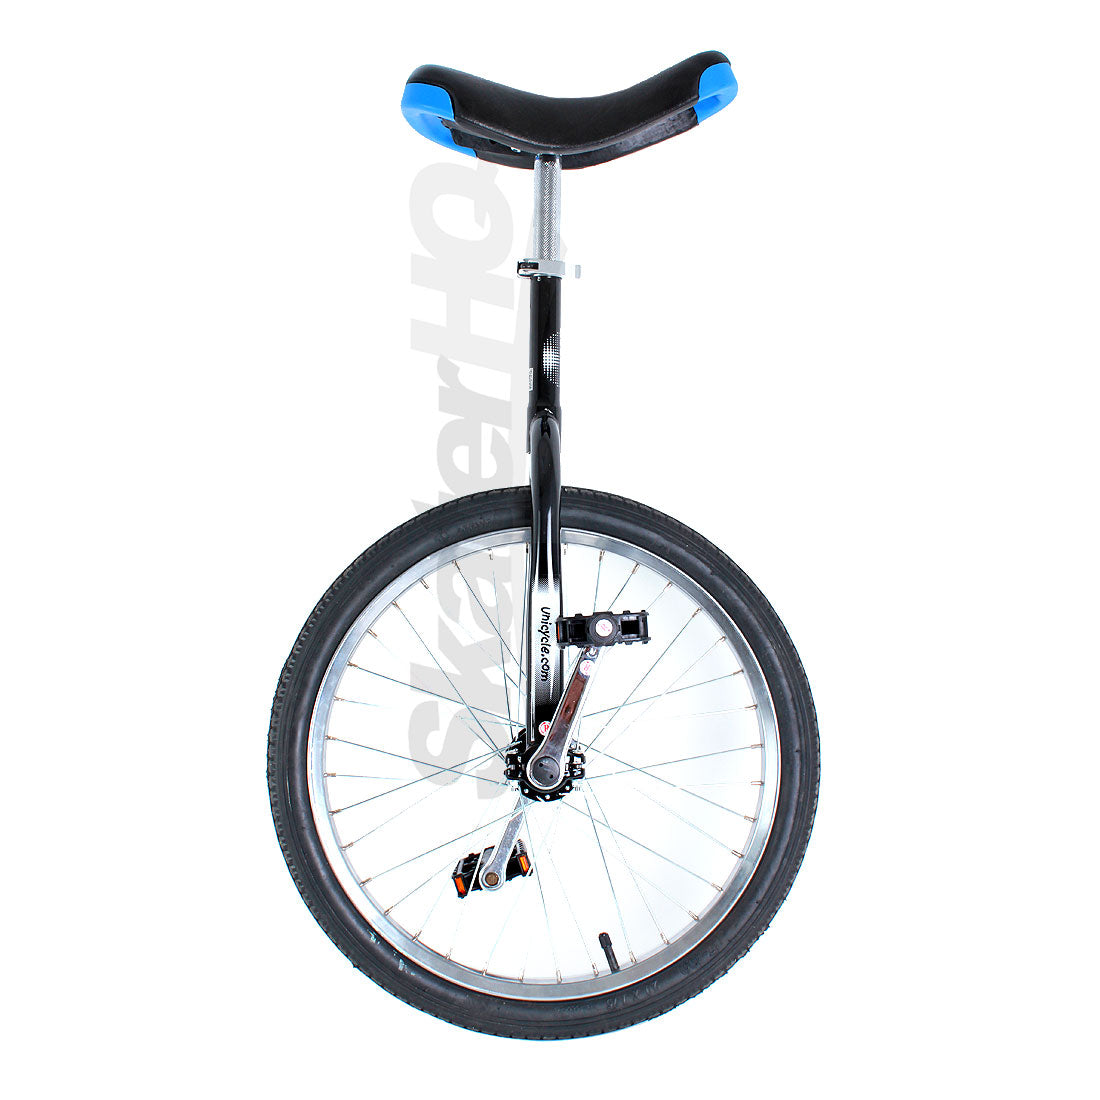 Hoppley Trainer 20inch Unicycle - Black Other Fun Toys